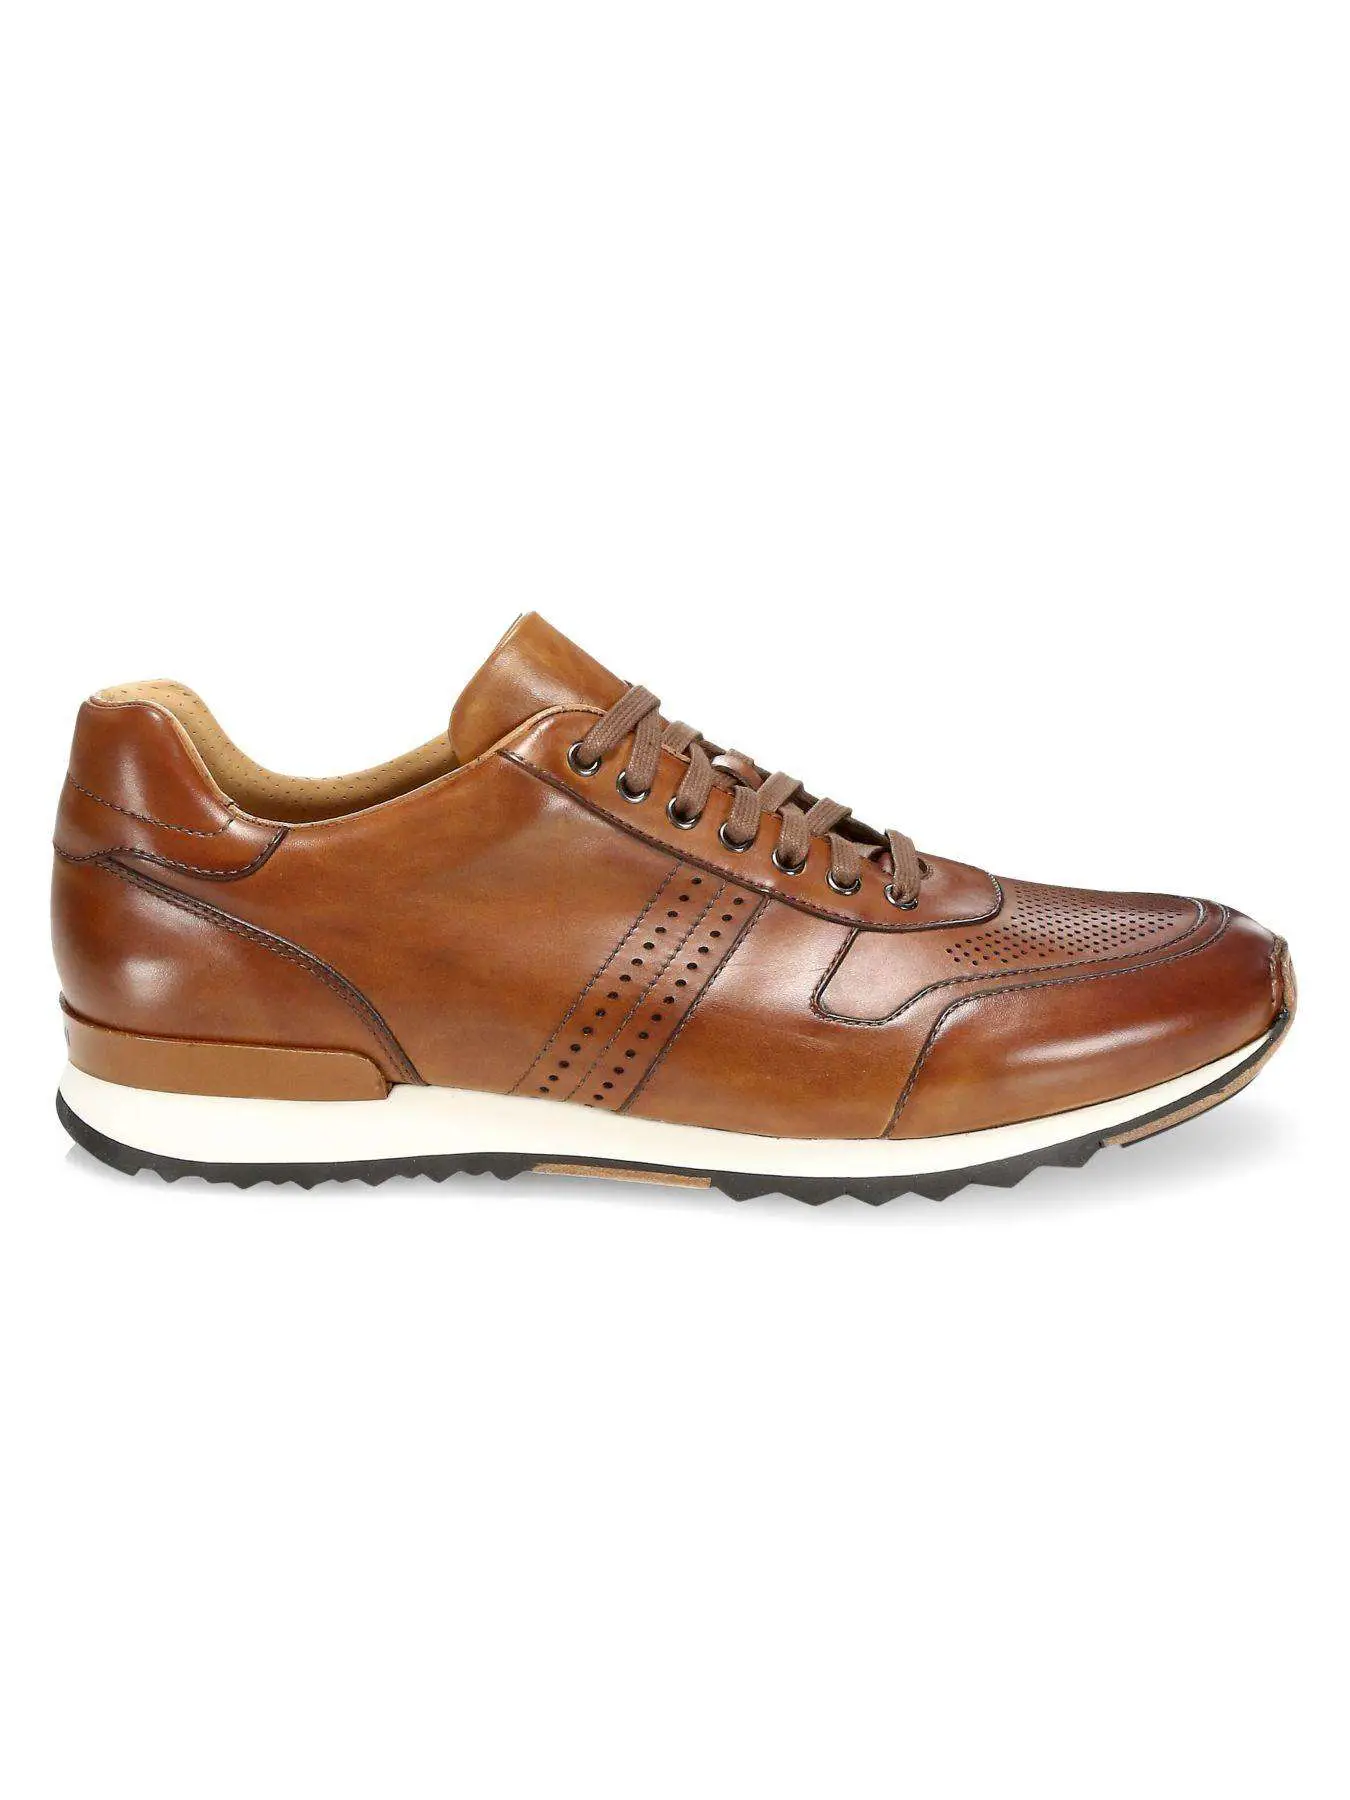 Saks Fifth Avenue Collection Leather Sneakers in Cognac ...